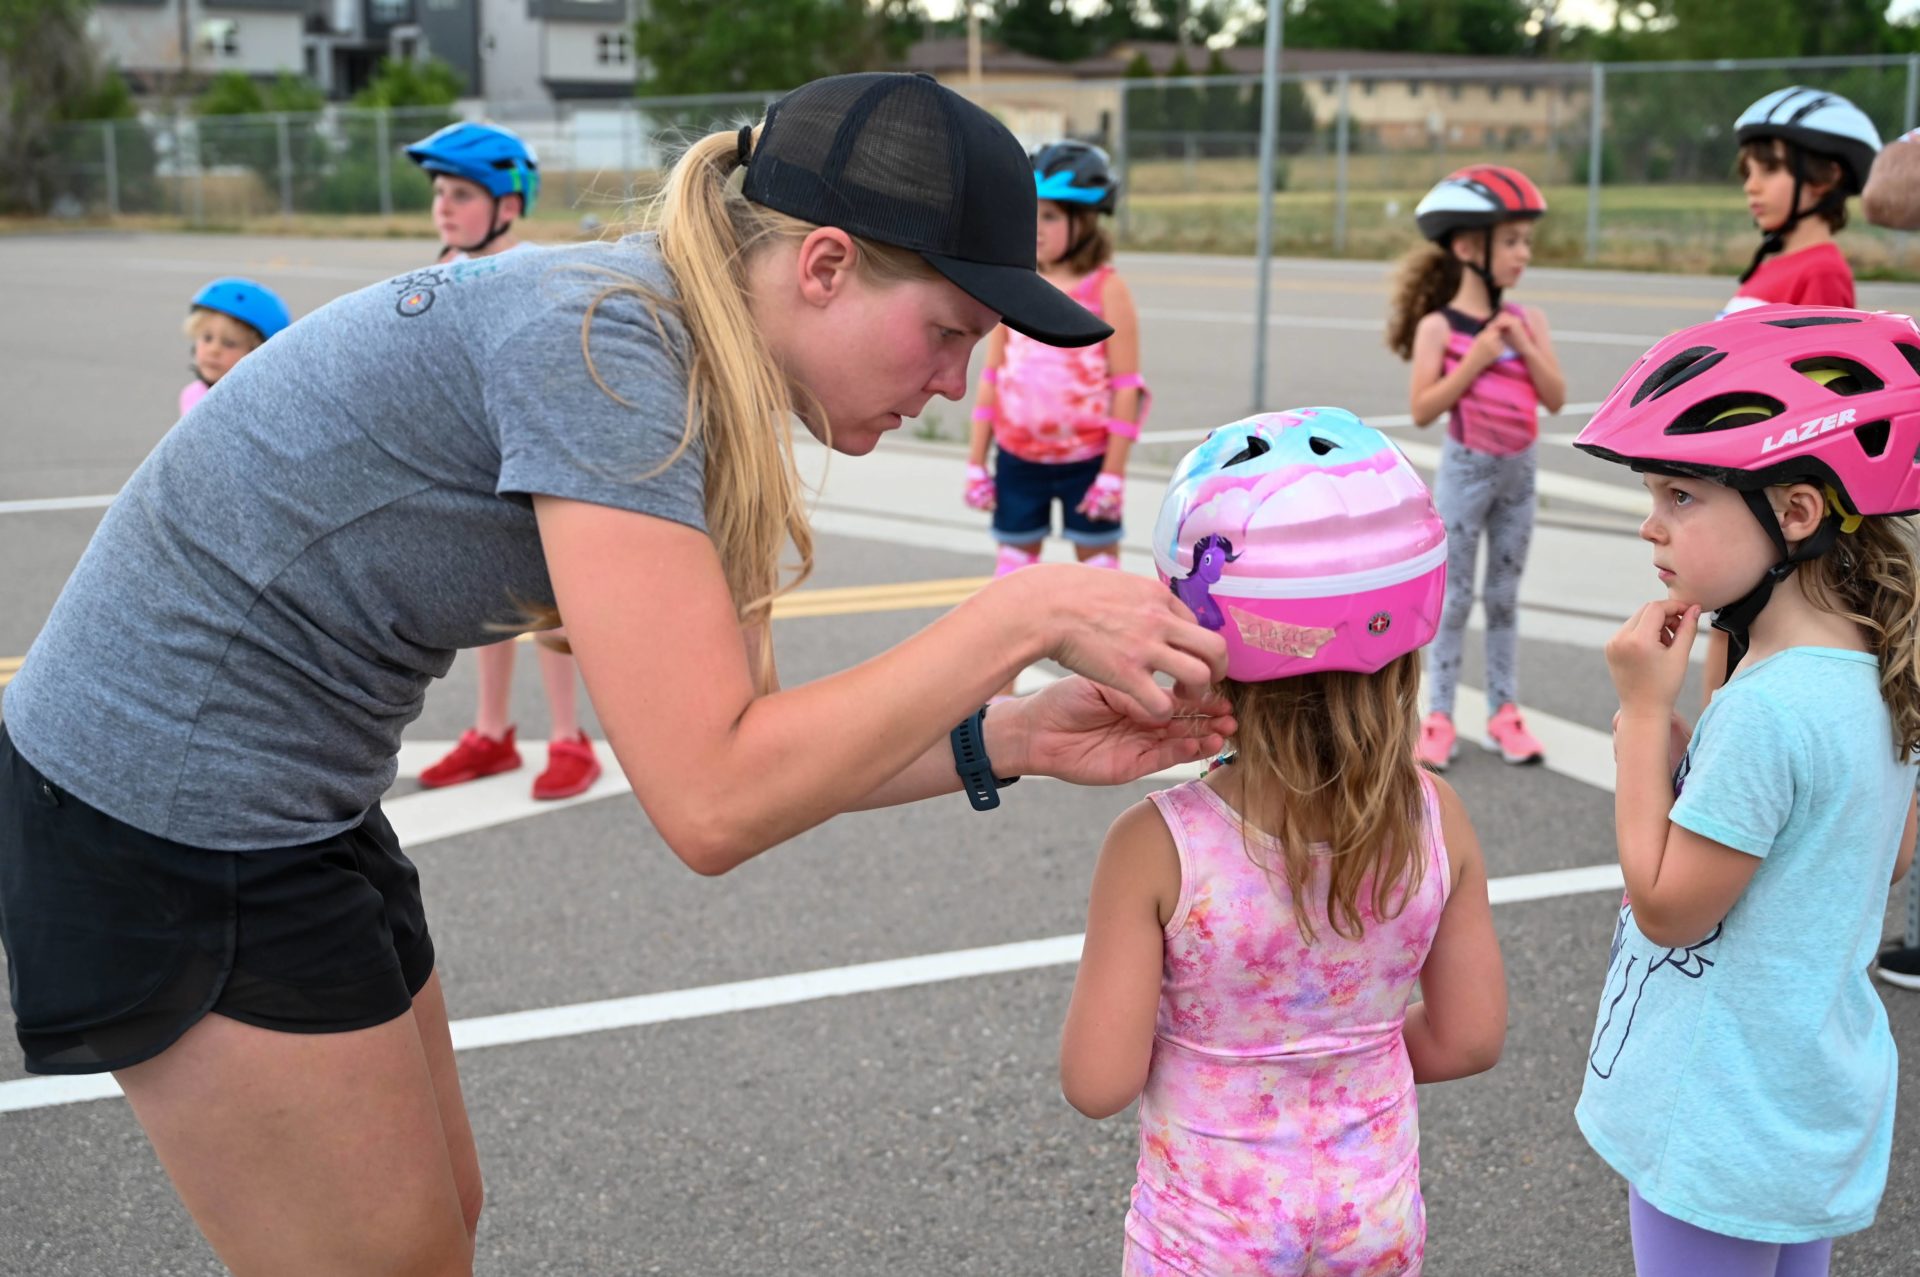 A woman leans down to adjust the bike helmet of a small child facing away from the camera, with several other children standing nearby.